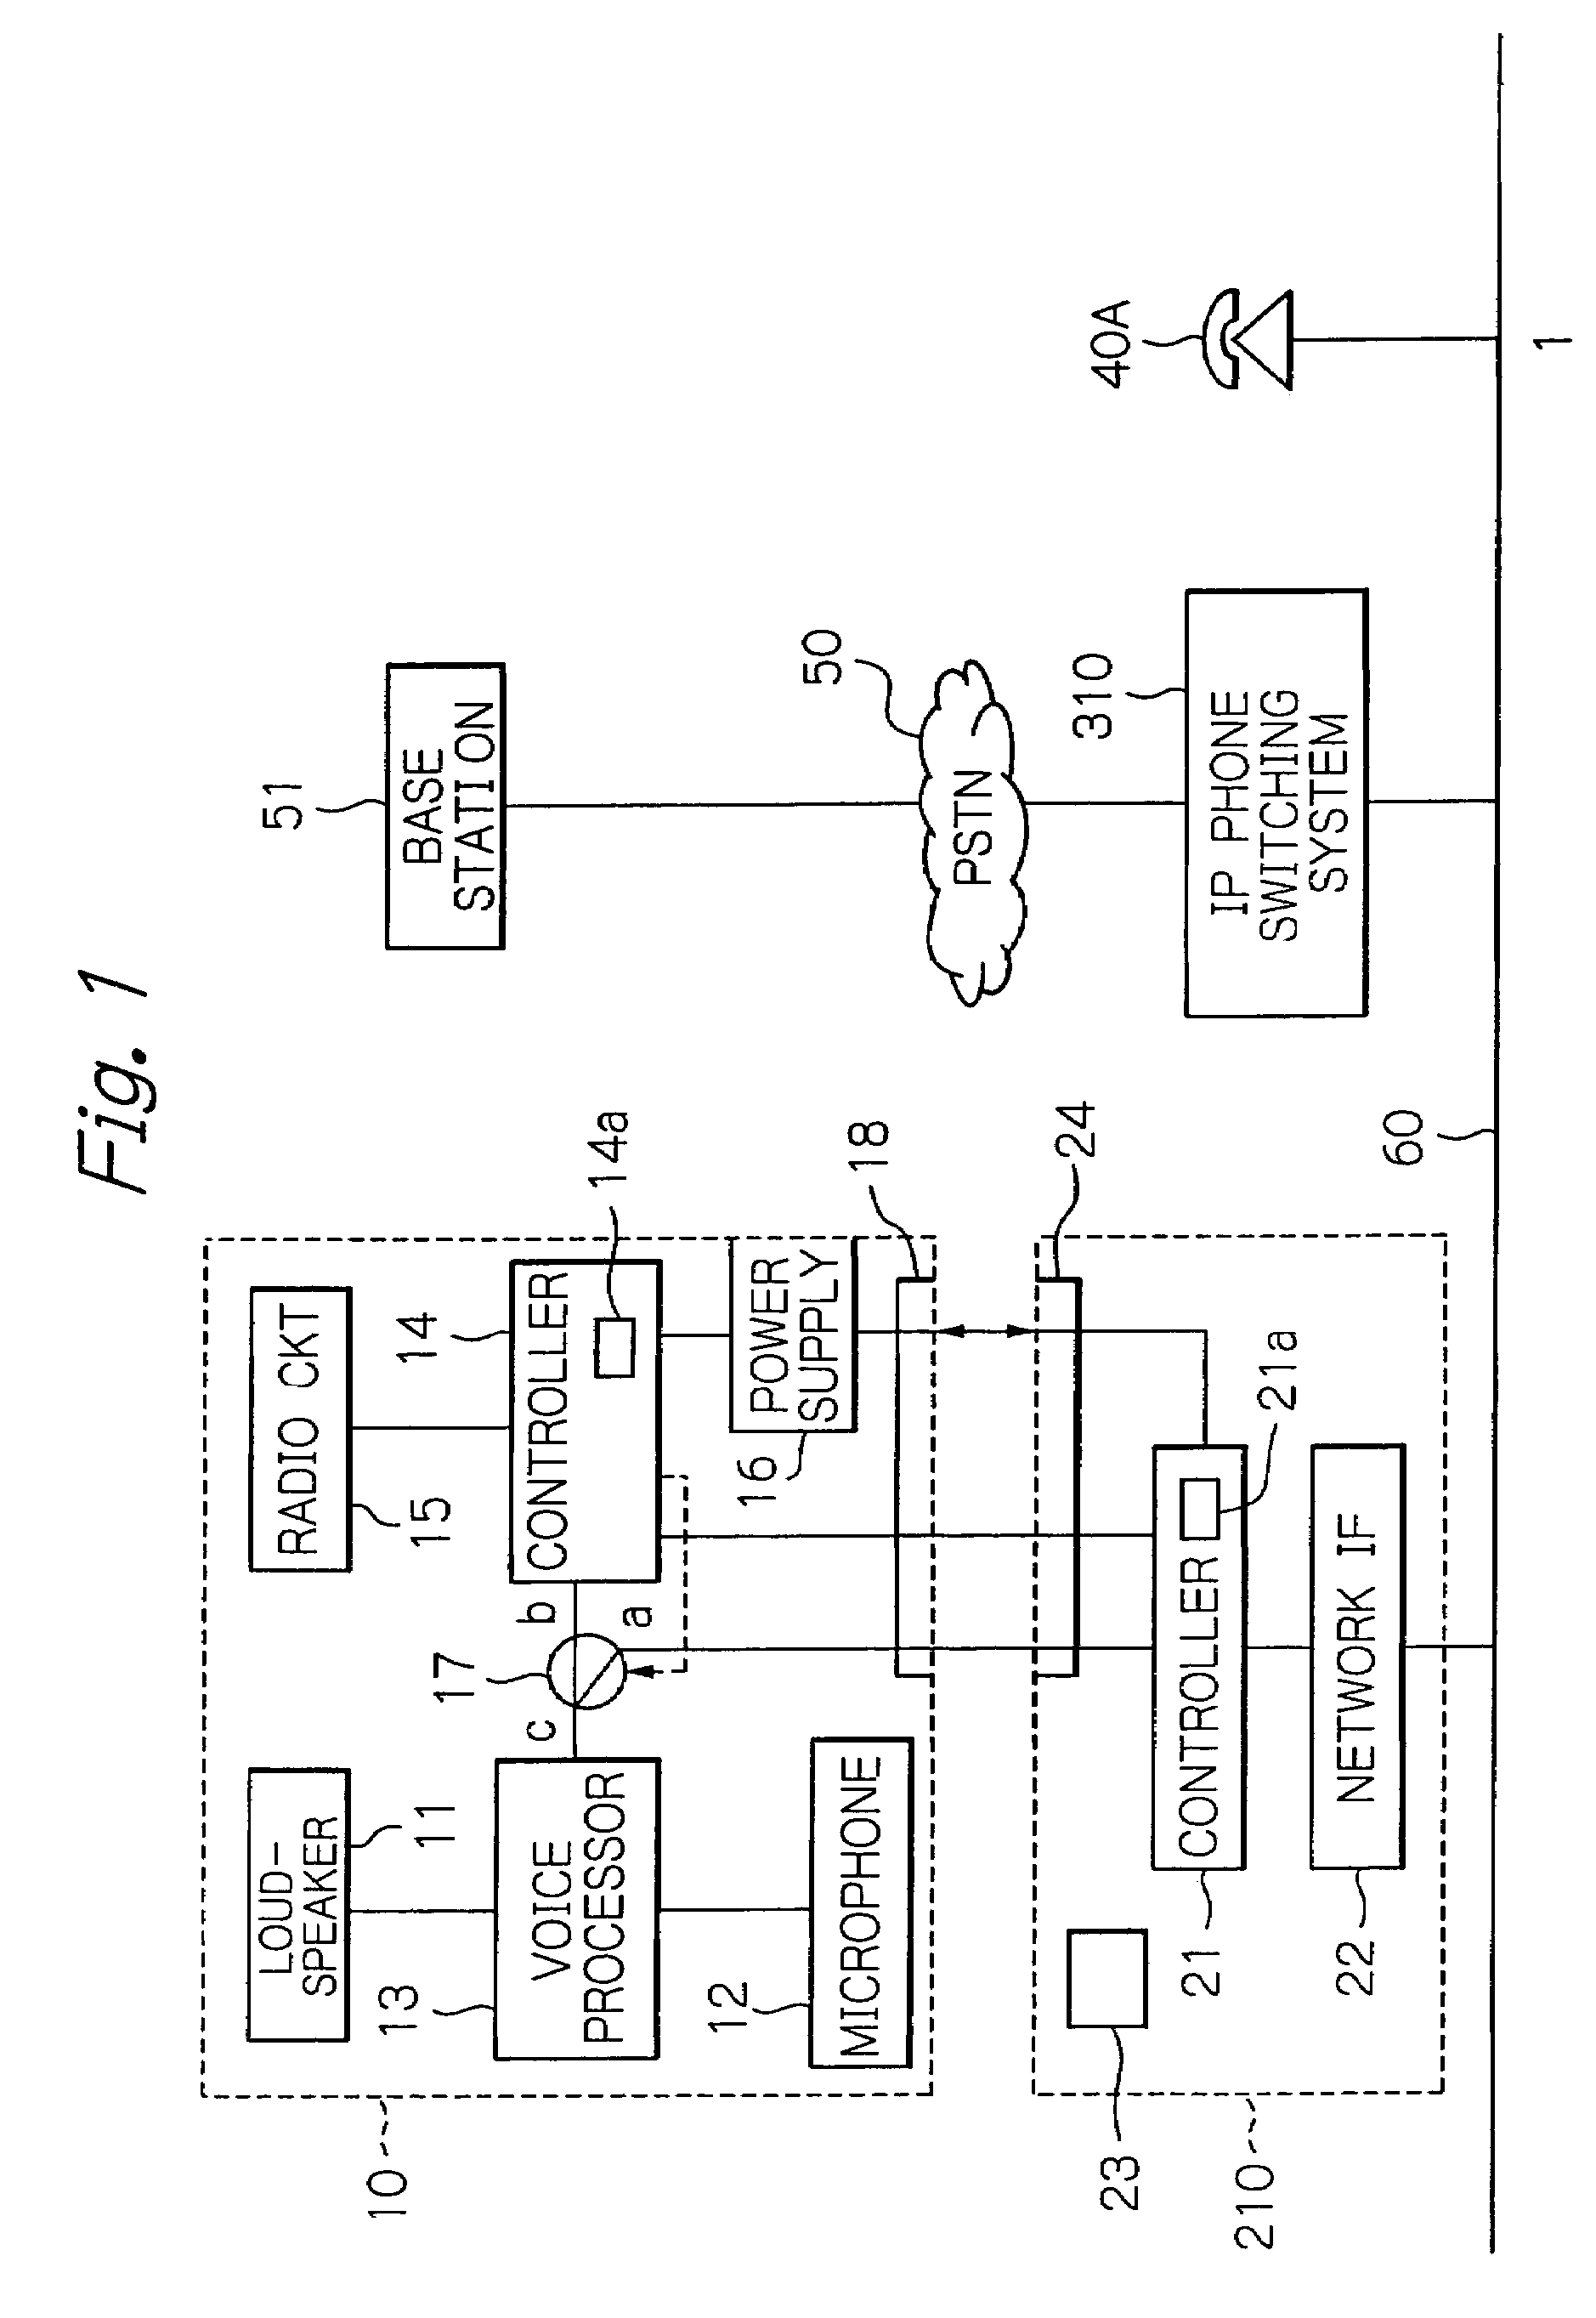 Switching system connecting a radio communication terminal via a LAN line to a public switched network or a leased line